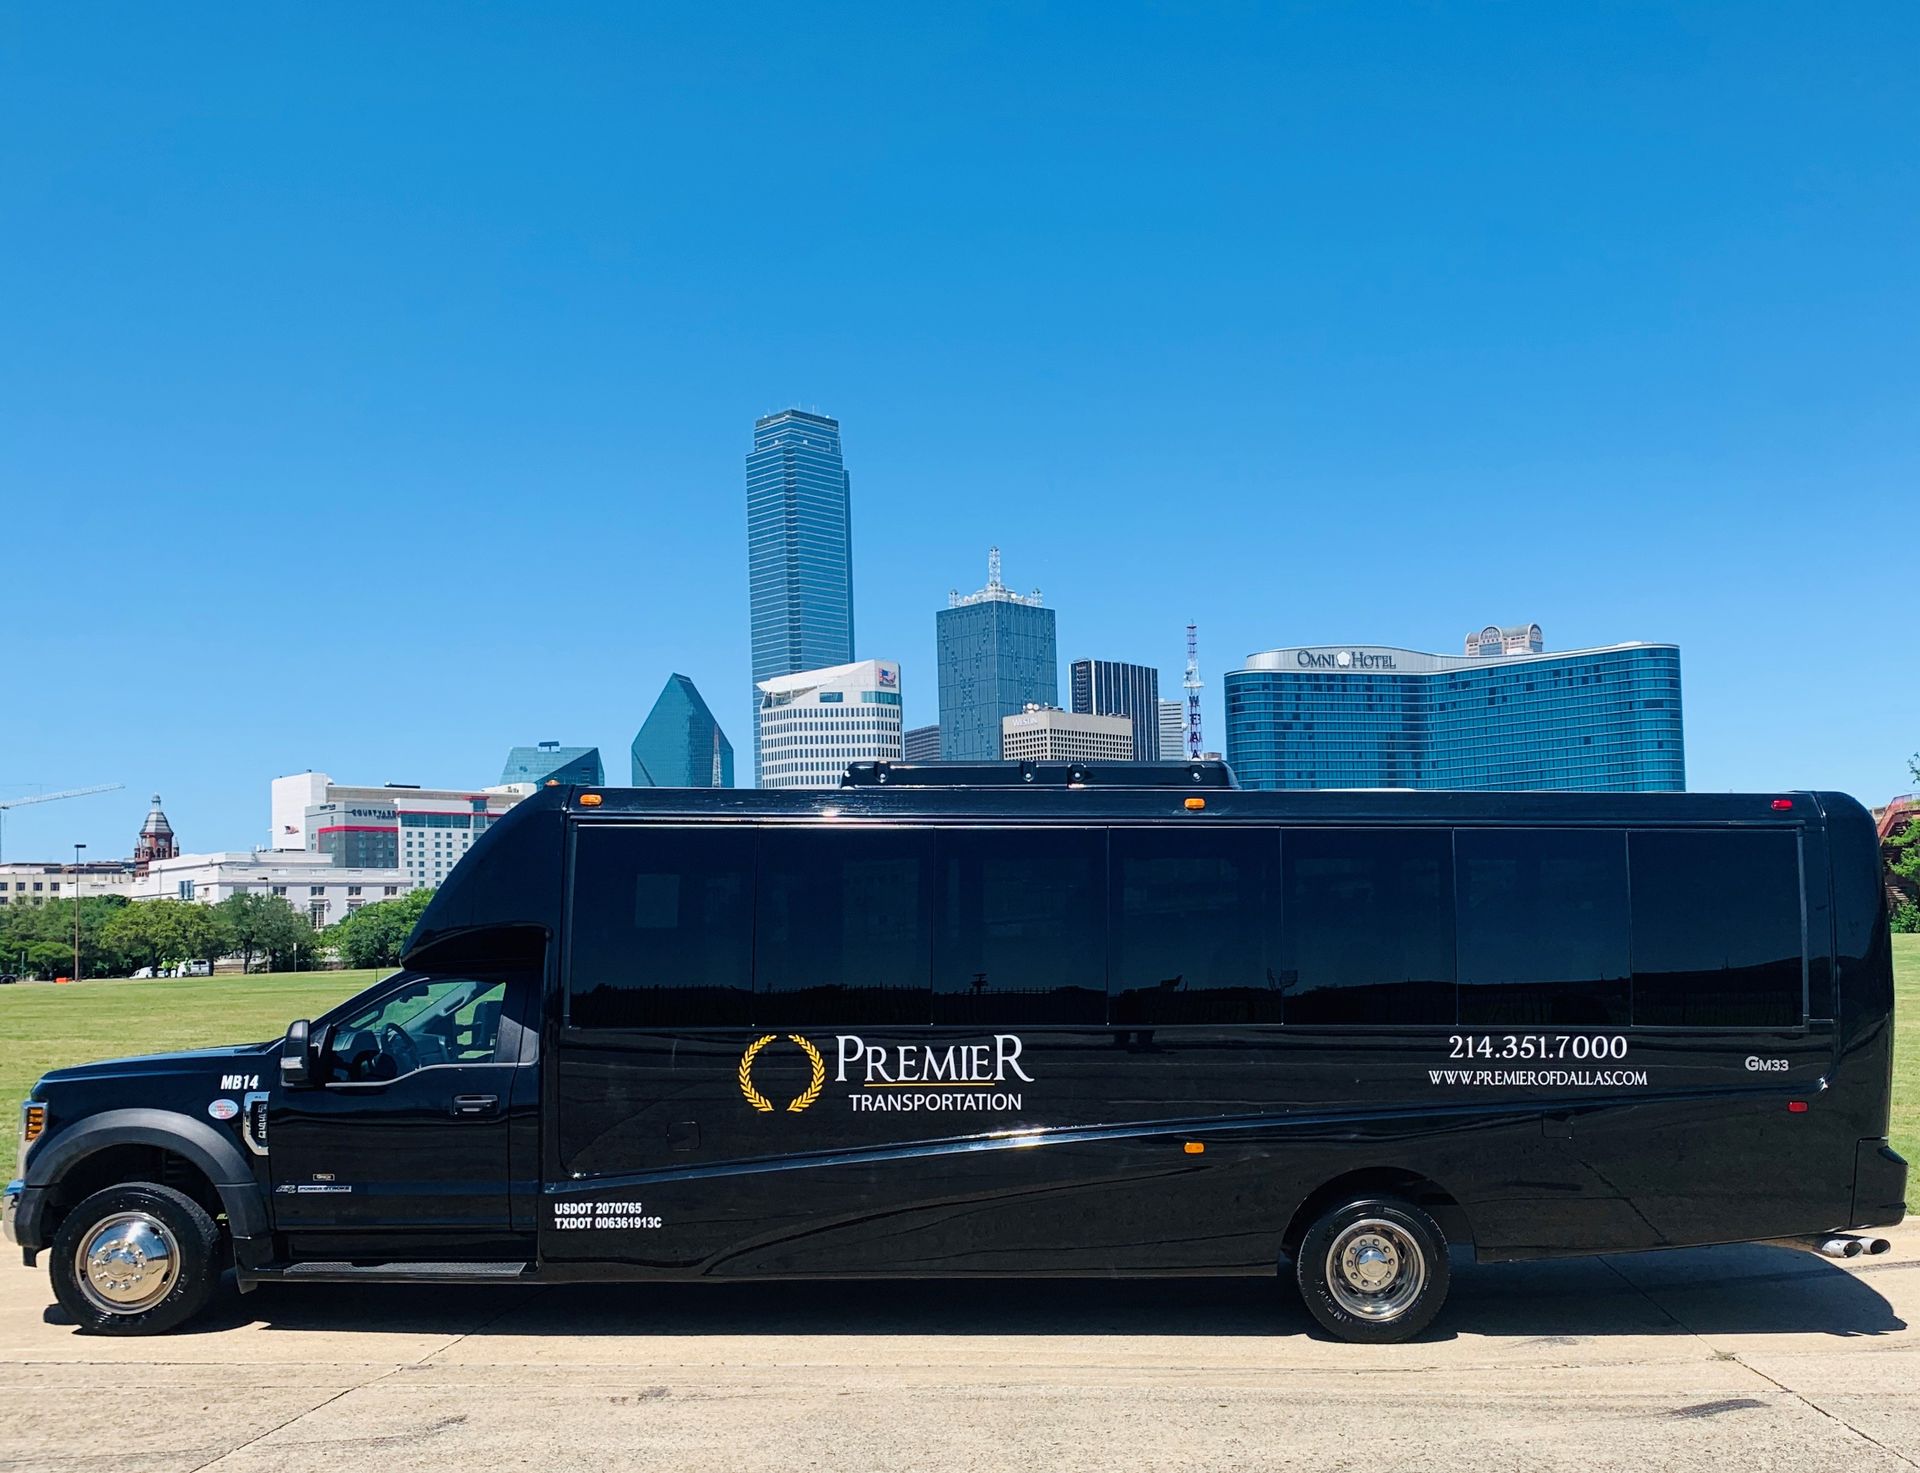 premier's black shuttle bus is parked in front of a city skyline